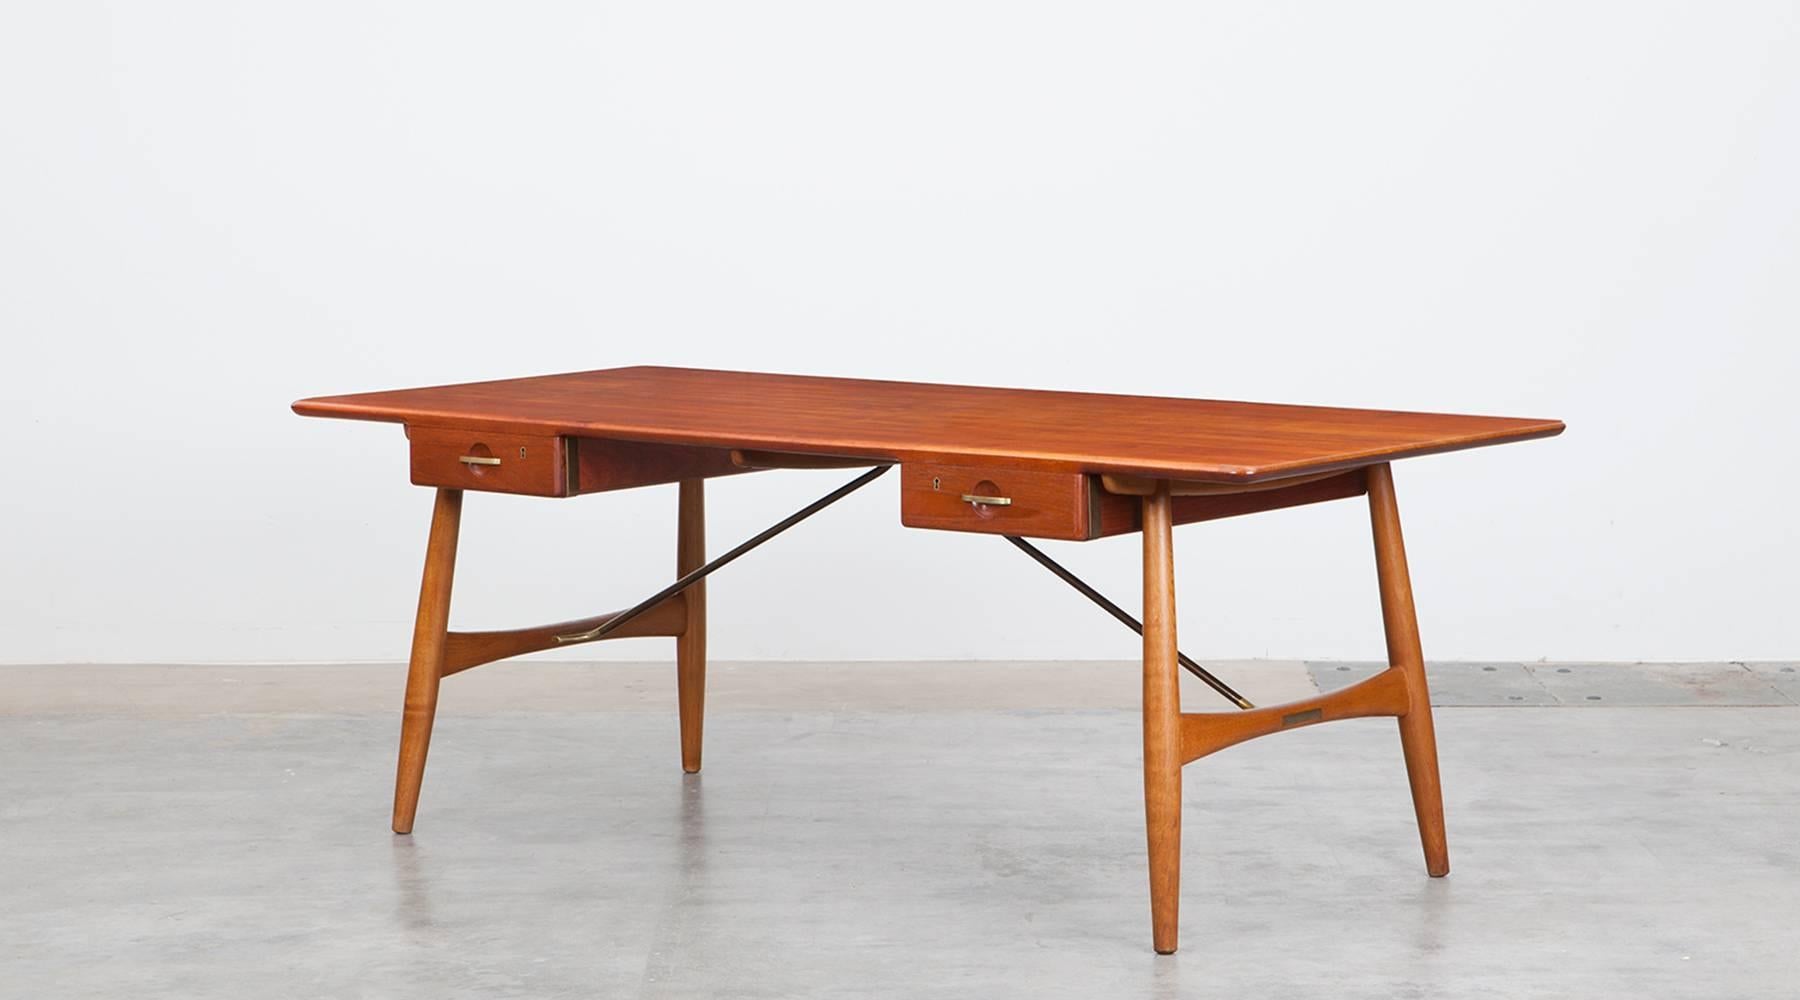 Stunning, solid desk designed by Hans Wegner comes with a teak top on four oak legs and frame. The table comes with two drawers. The details on frame and drawers are brass. Manufactured by Johannes Hansen.

Wegner's work is a lifelong quest to